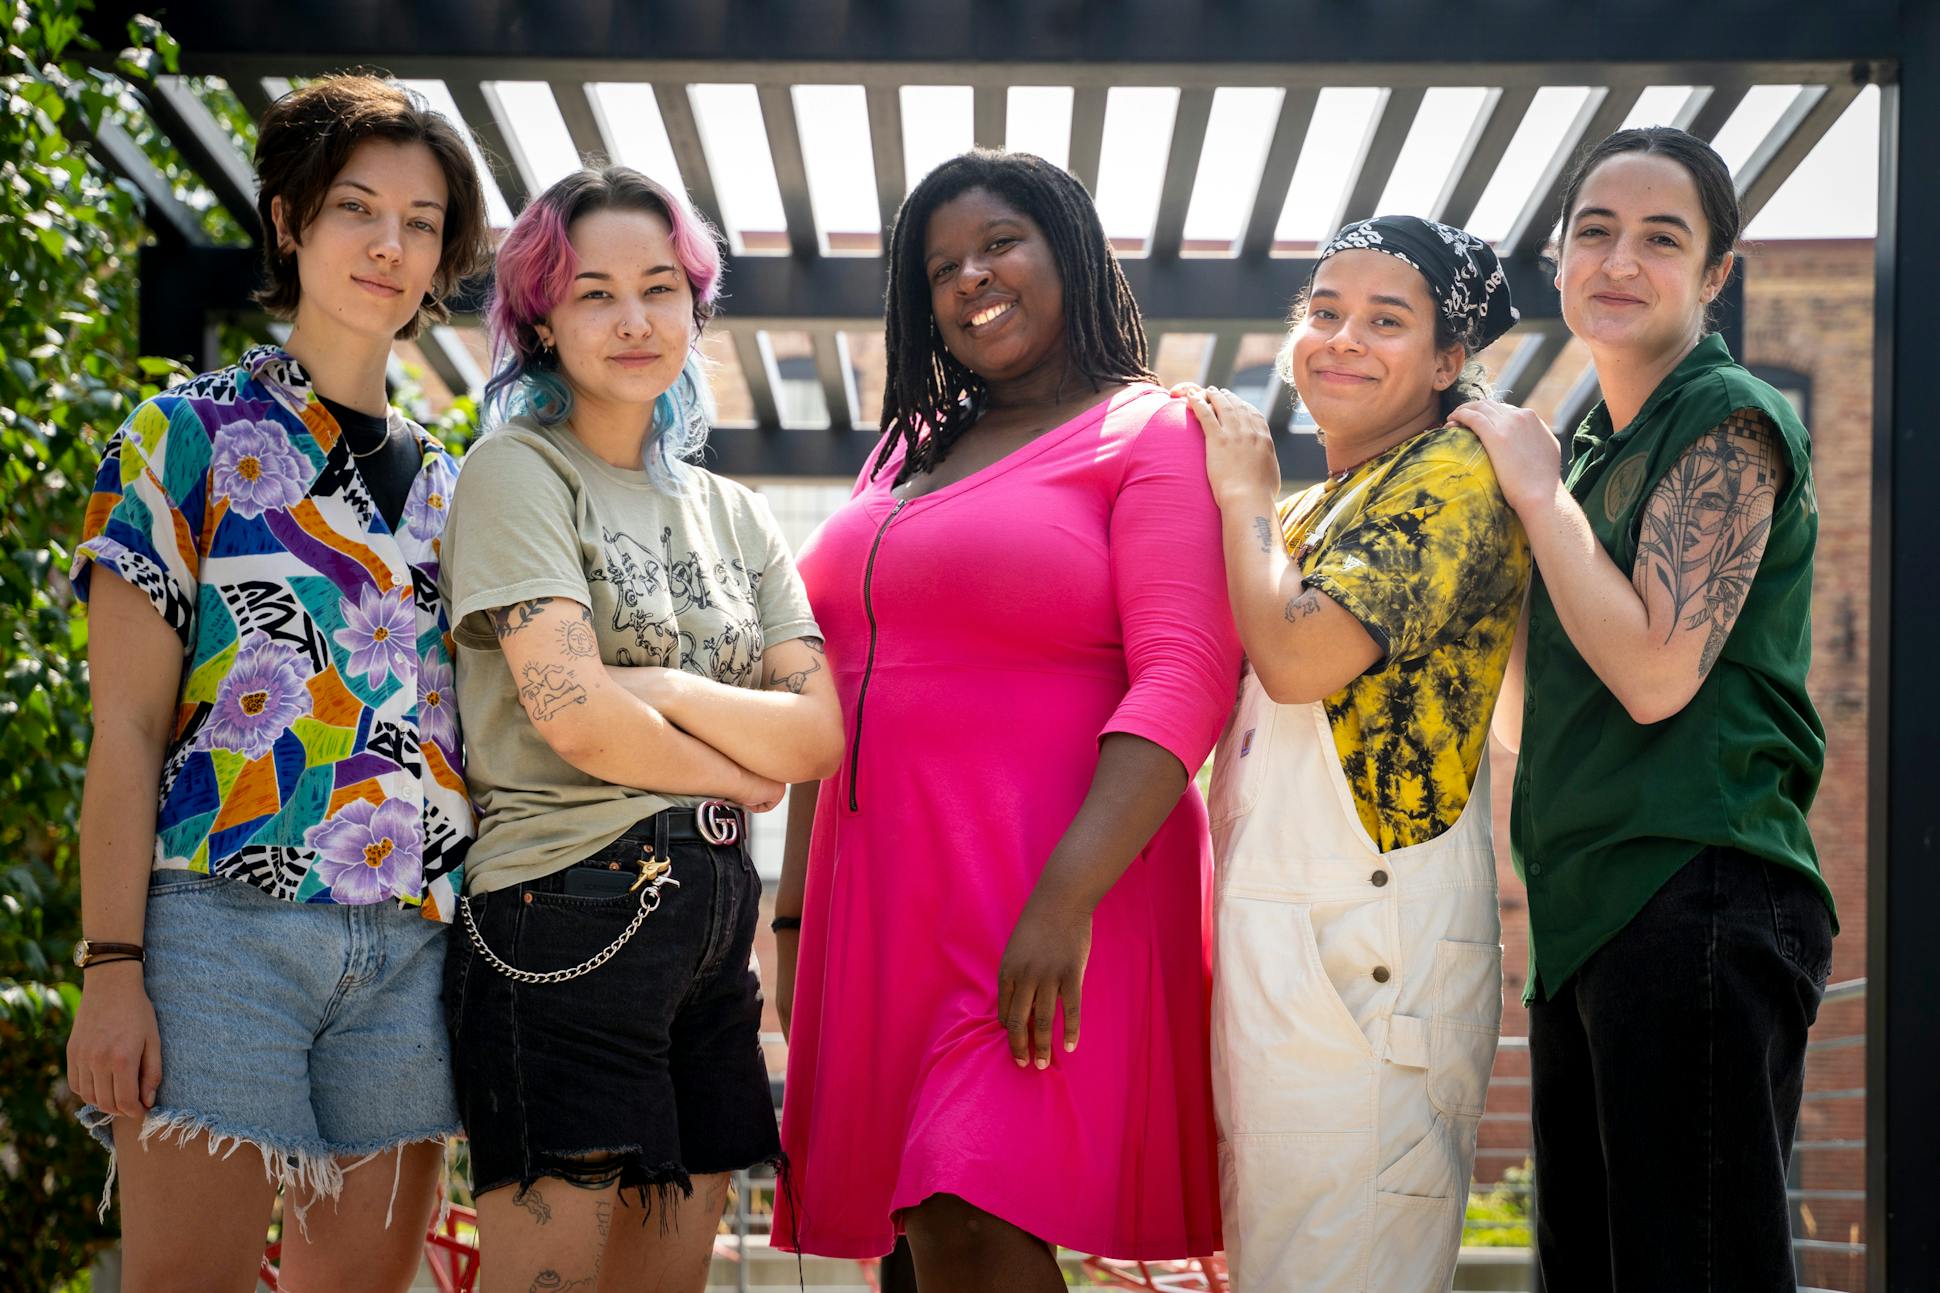 Maddy Flisk, Natalie Ollila, Victoria Leonard, Zant Peralta and CJ Jennings, the co-founders of new queer bar the Brass Strap pose together in Minneapolis on Monday, July 24, 2023. Opening in 2025, the Brass Strap will be the city's first lesbian and queer bar.